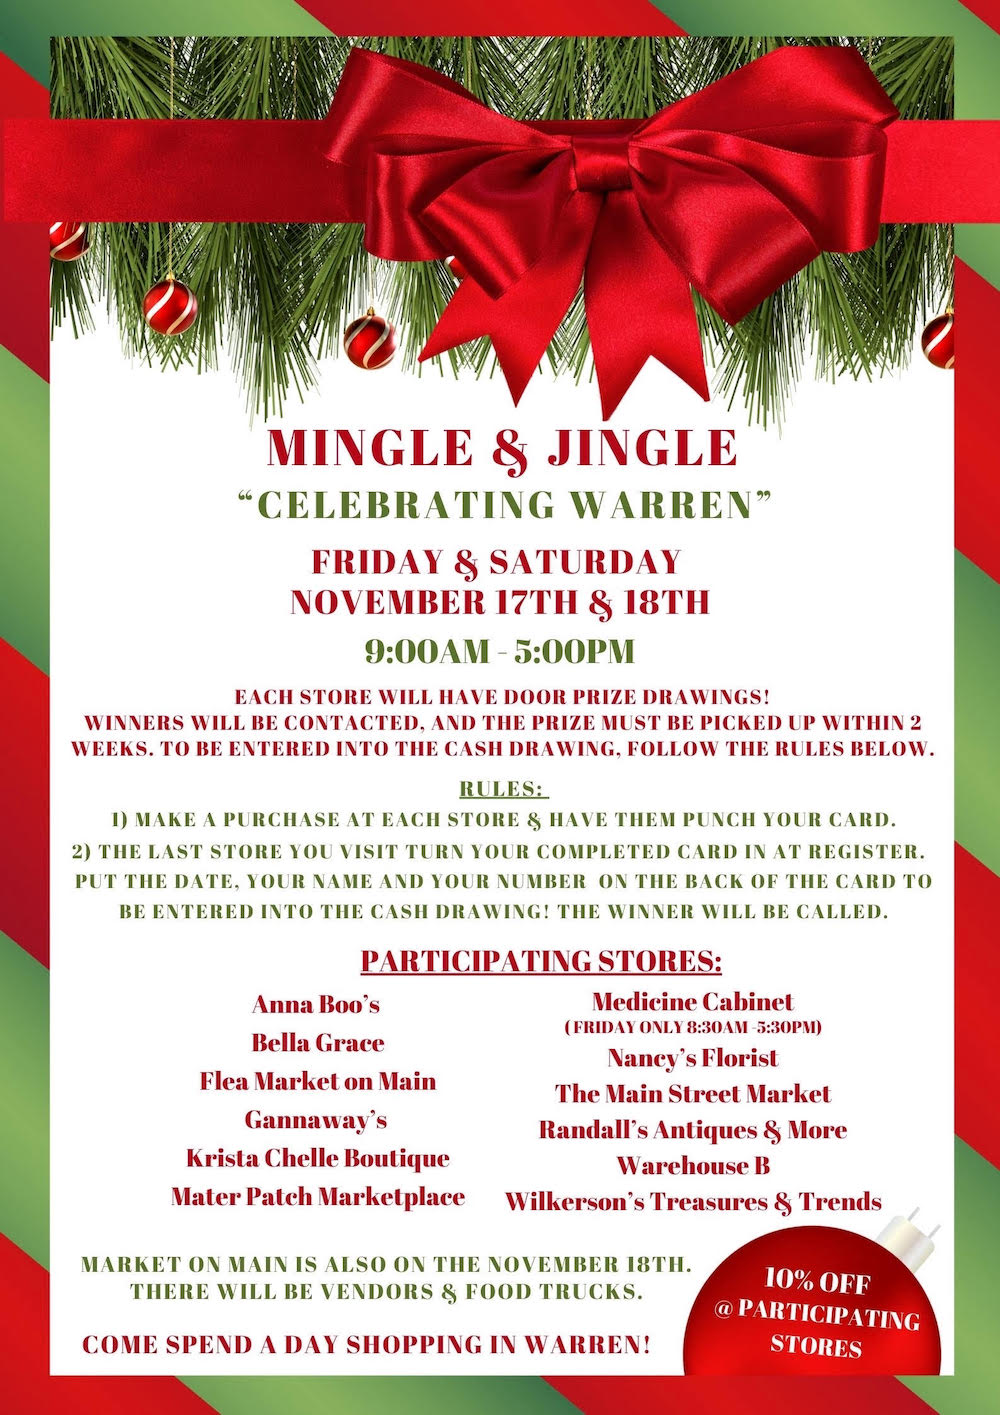 Downtown businesses plan ‘Mingle and Jingle’ event for November 17th